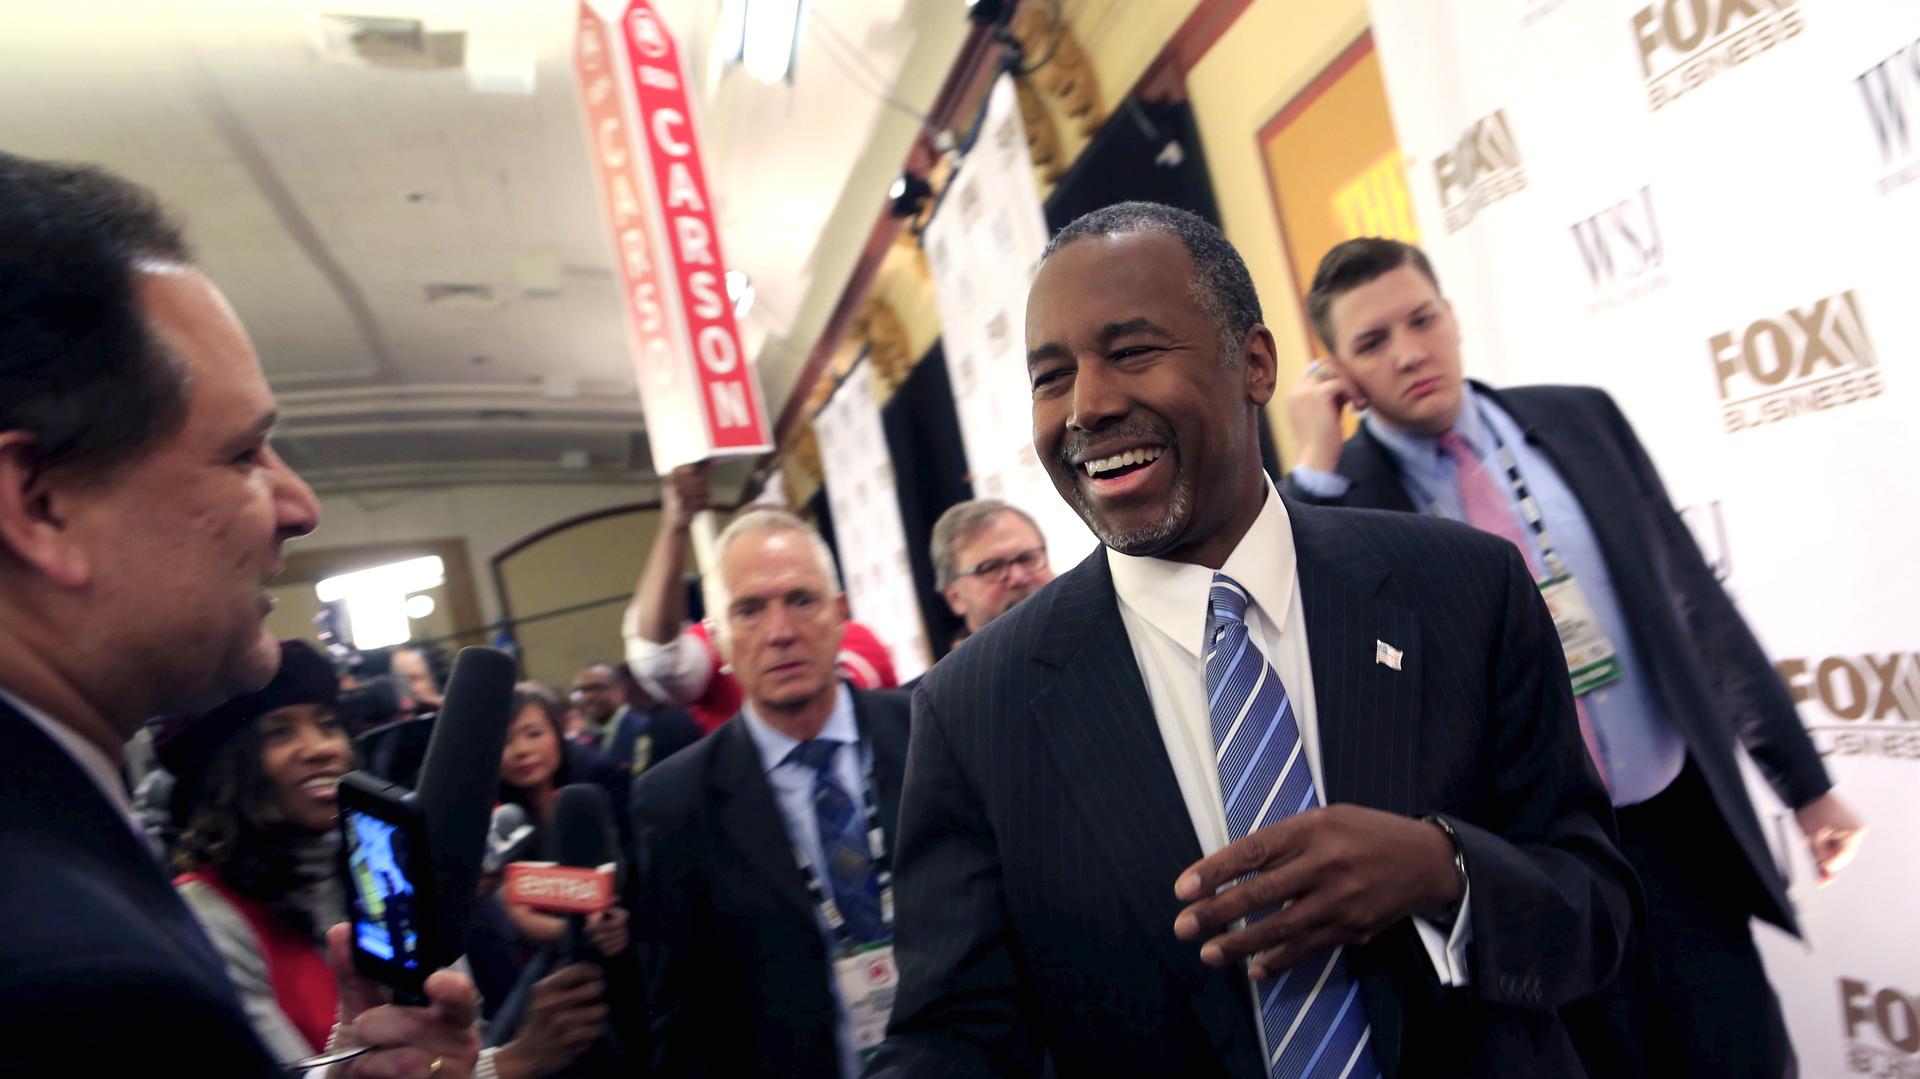 Ben Carson takes questions from the media in the spin room after the debate held by Fox Business Network for the top 2016 U.S. Republican candidates in Milwaukee, Wisconsin on November 10, 2015.